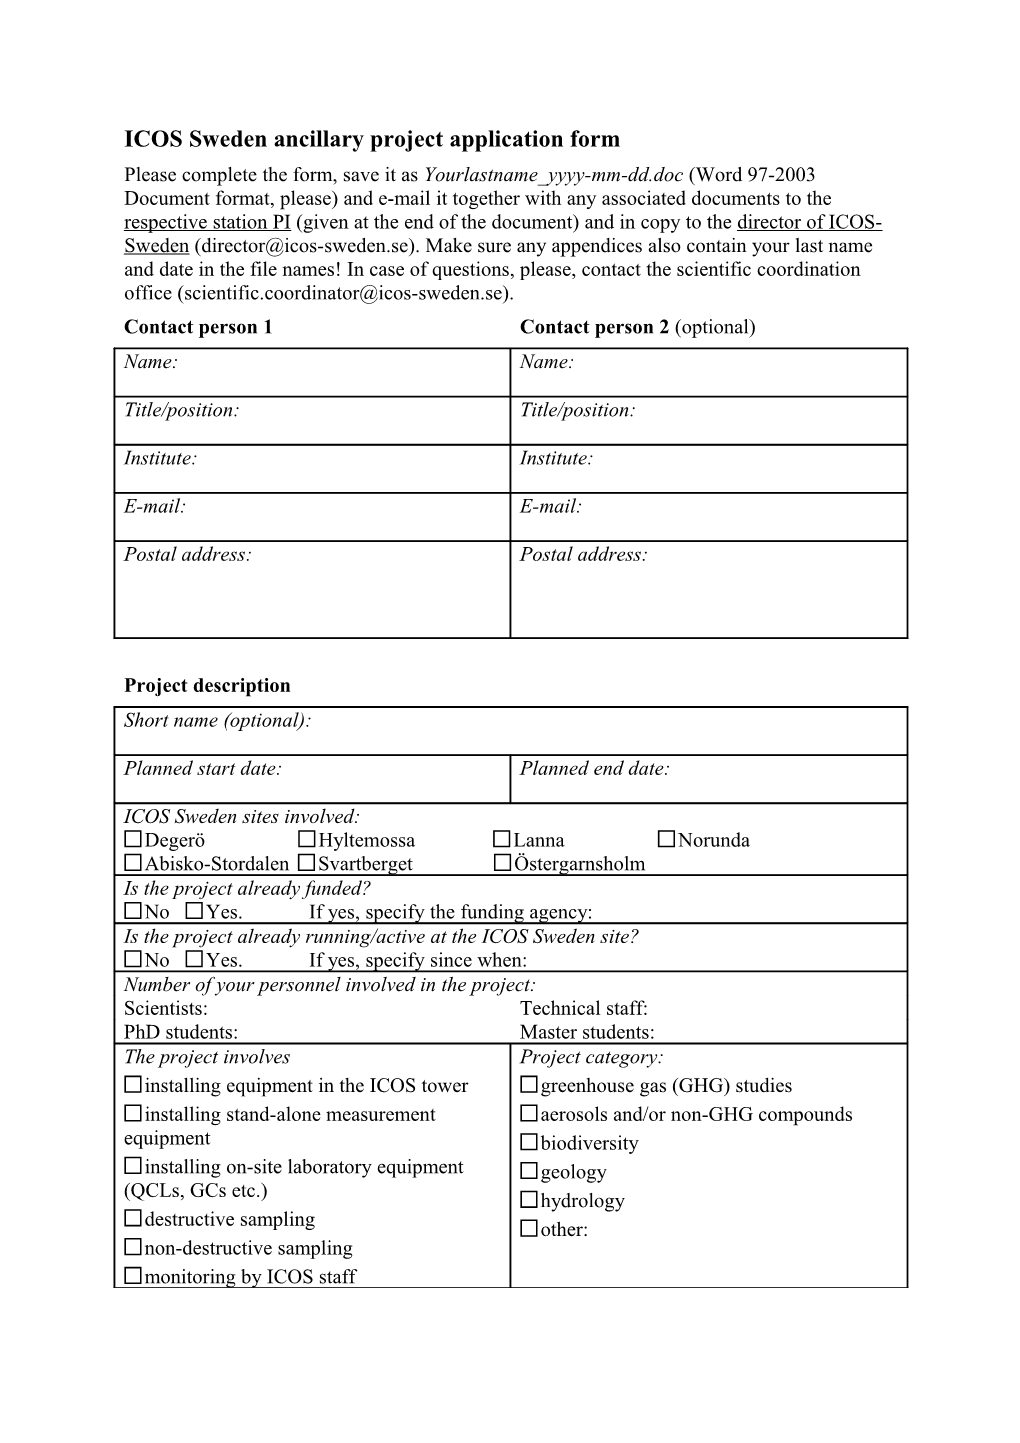 ICOS Sweden Ancillary Project Application Form